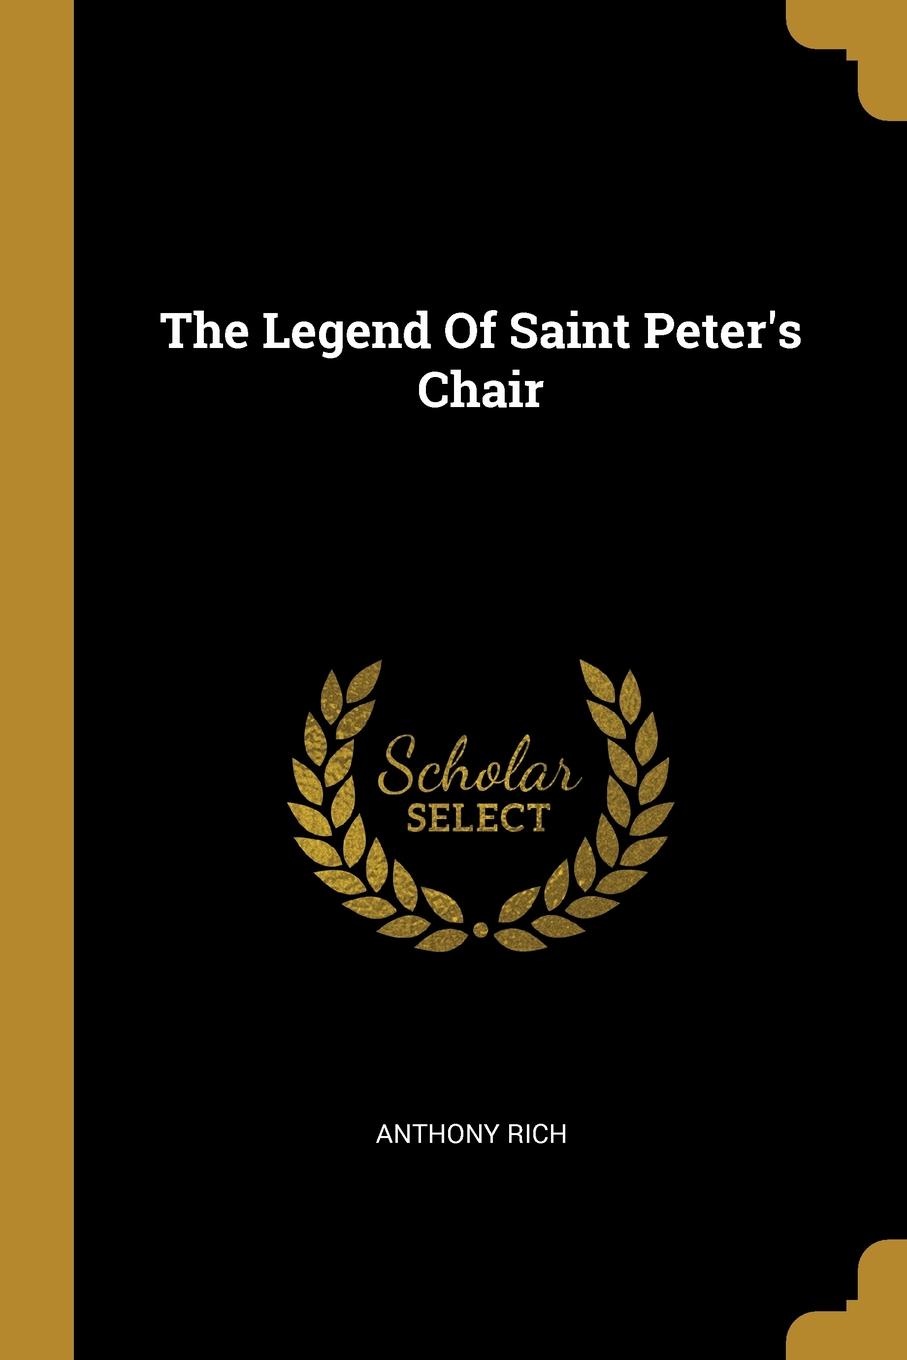 The Legend Of Saint Peter.s Chair